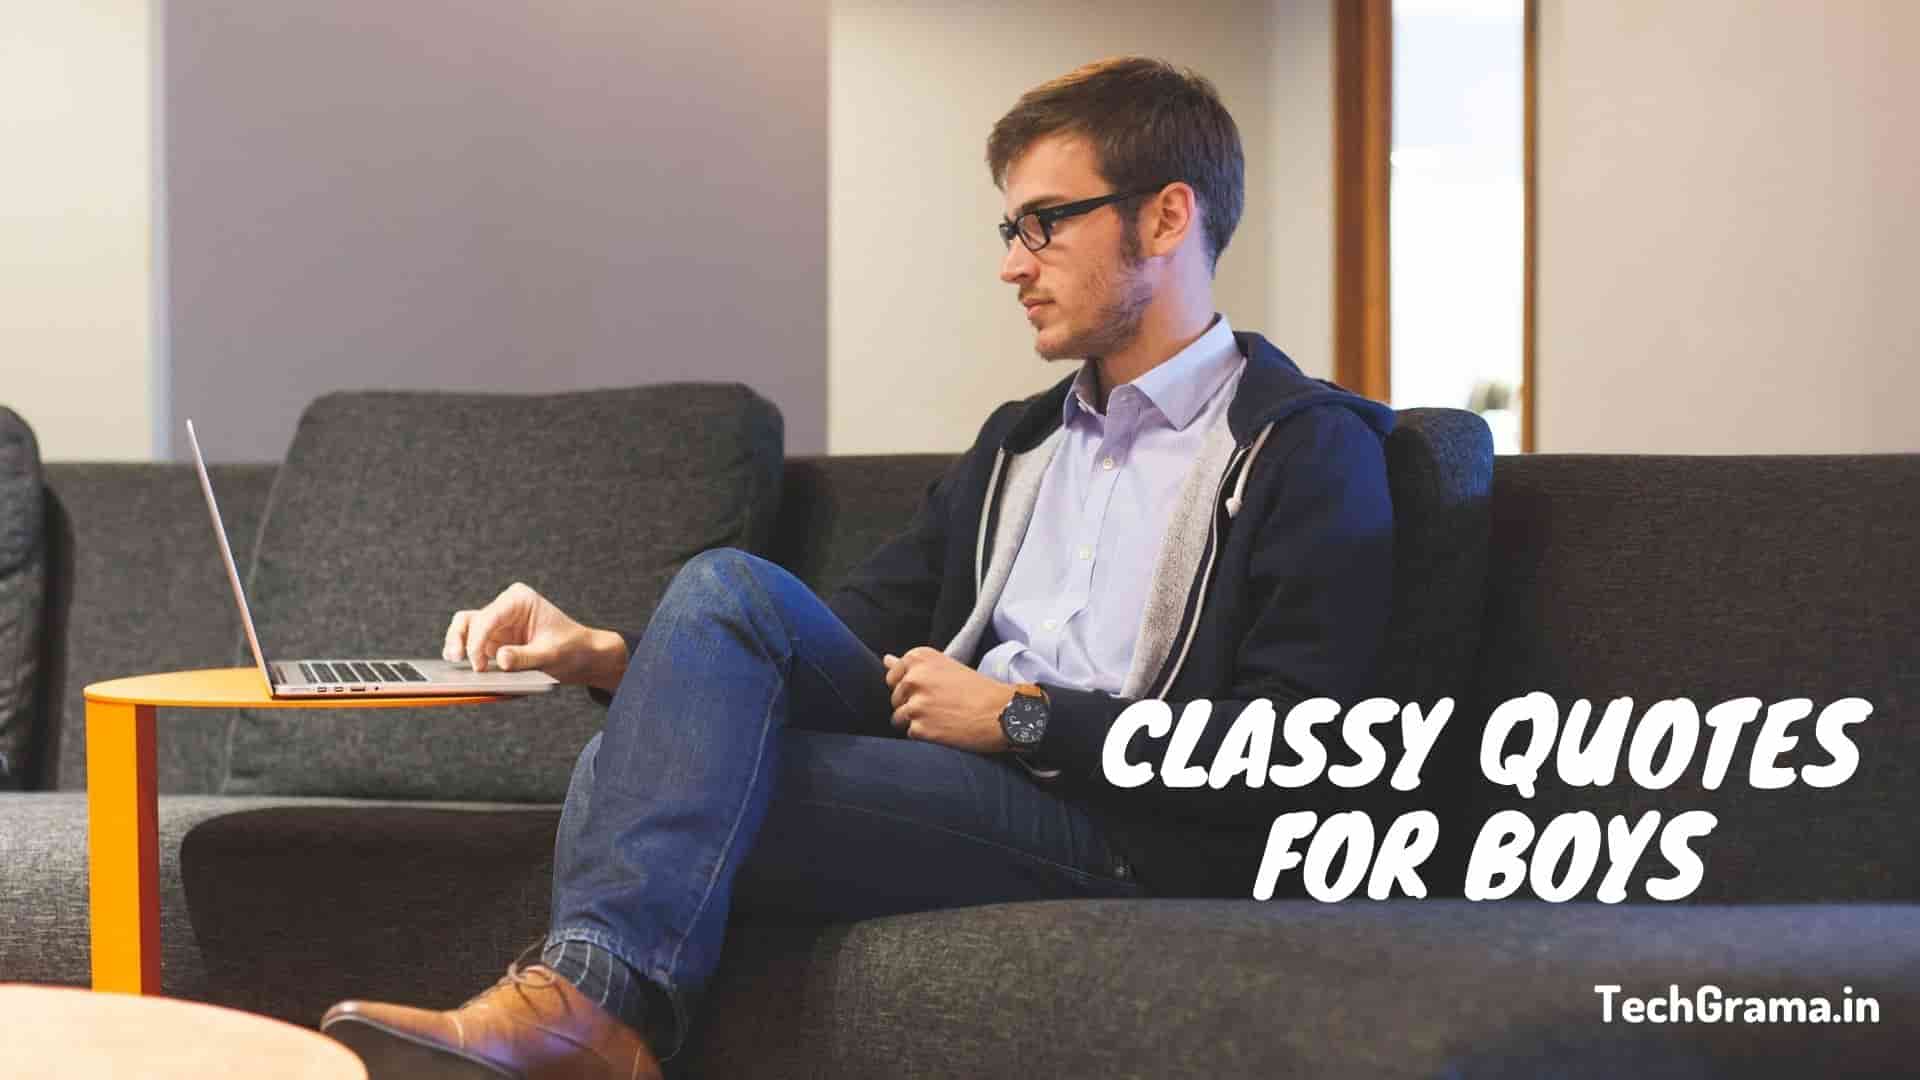 Best Classy Quotes For Men's, Classy Man Quotes, Classy Gentleman Quotes, Classy Quotes For Boys, Quotes on Being Classy, Quotes on Classy Attitude, Classy Quotes For Instagram, Classy Quotes For Men, Quotes on Classy Man, Classy Standard Quotes, Quotes About Being Classy, Classy Look Quotes, Quotes on Classy Attitude For Boys.